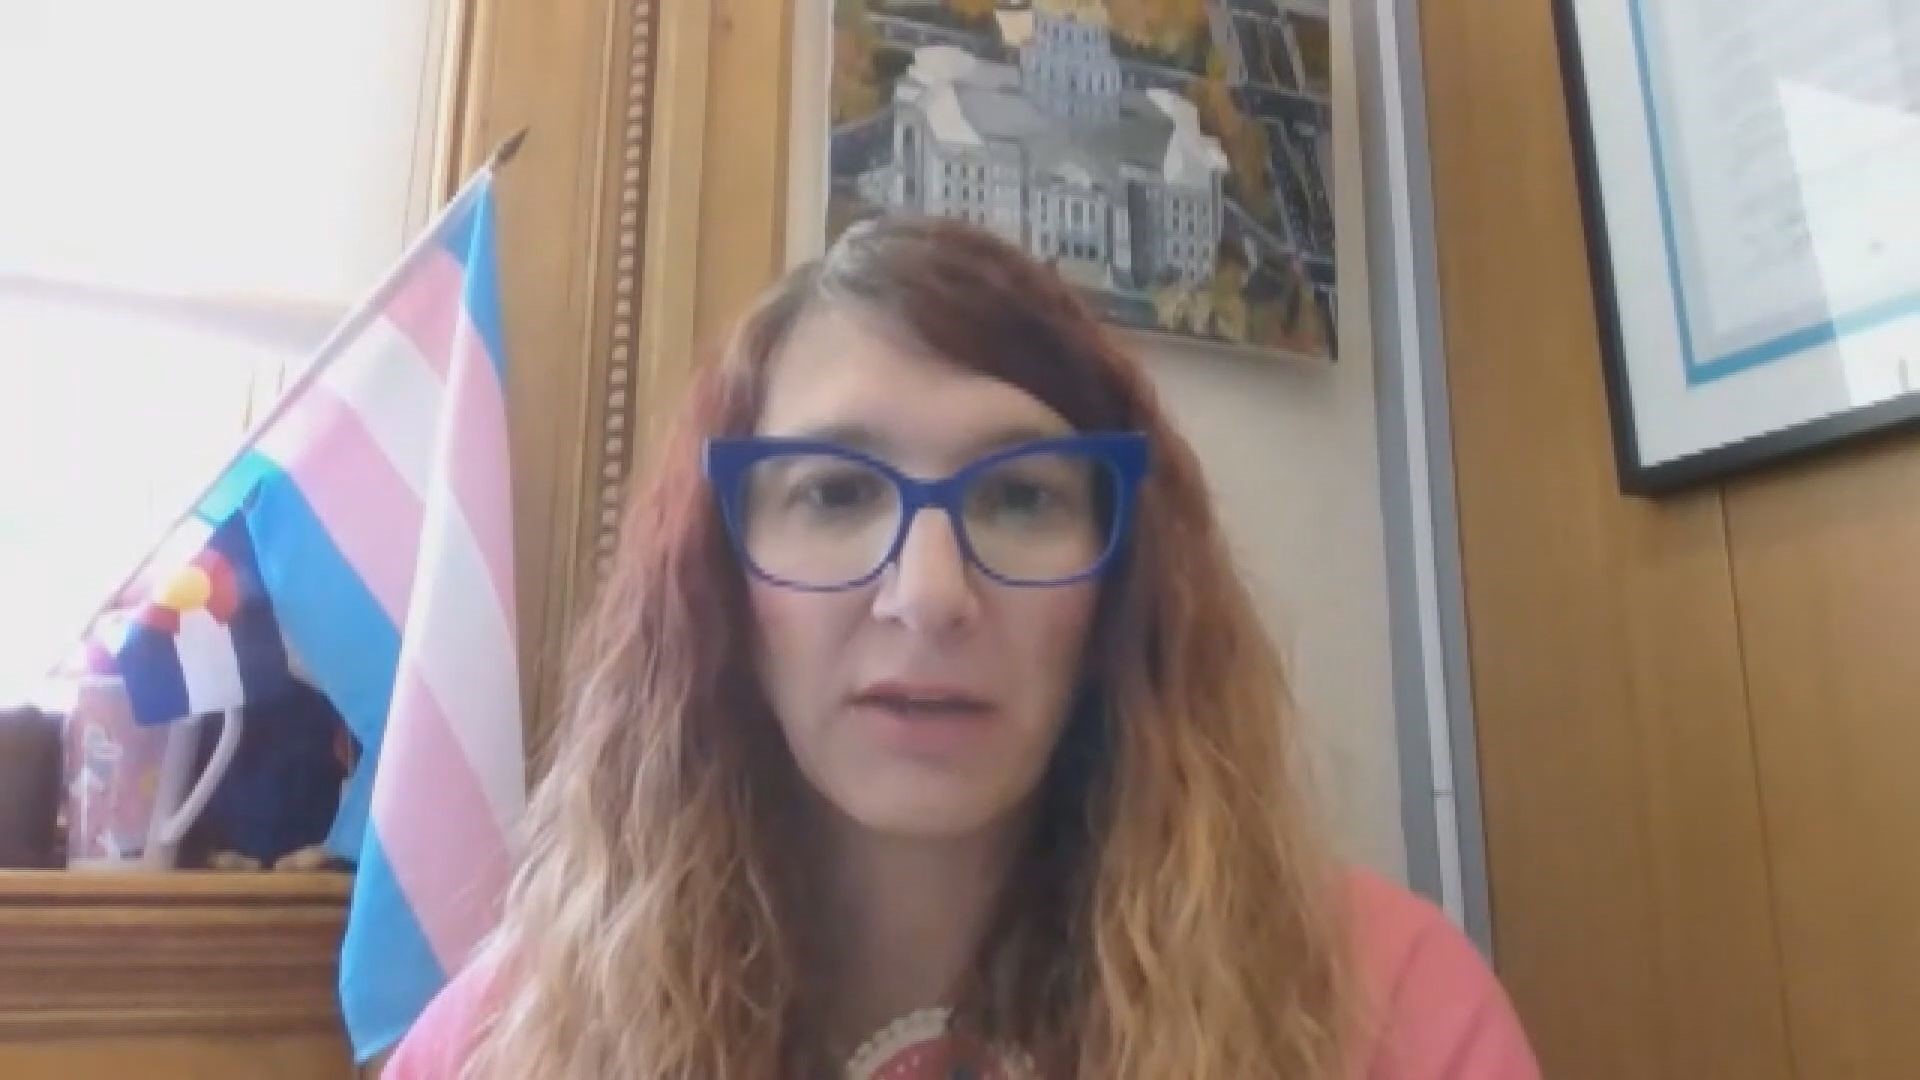 Titone, Colorado's first transgender lawmaker, said the day is essential to advancing LGBTQ rights in Colorado and across the country.